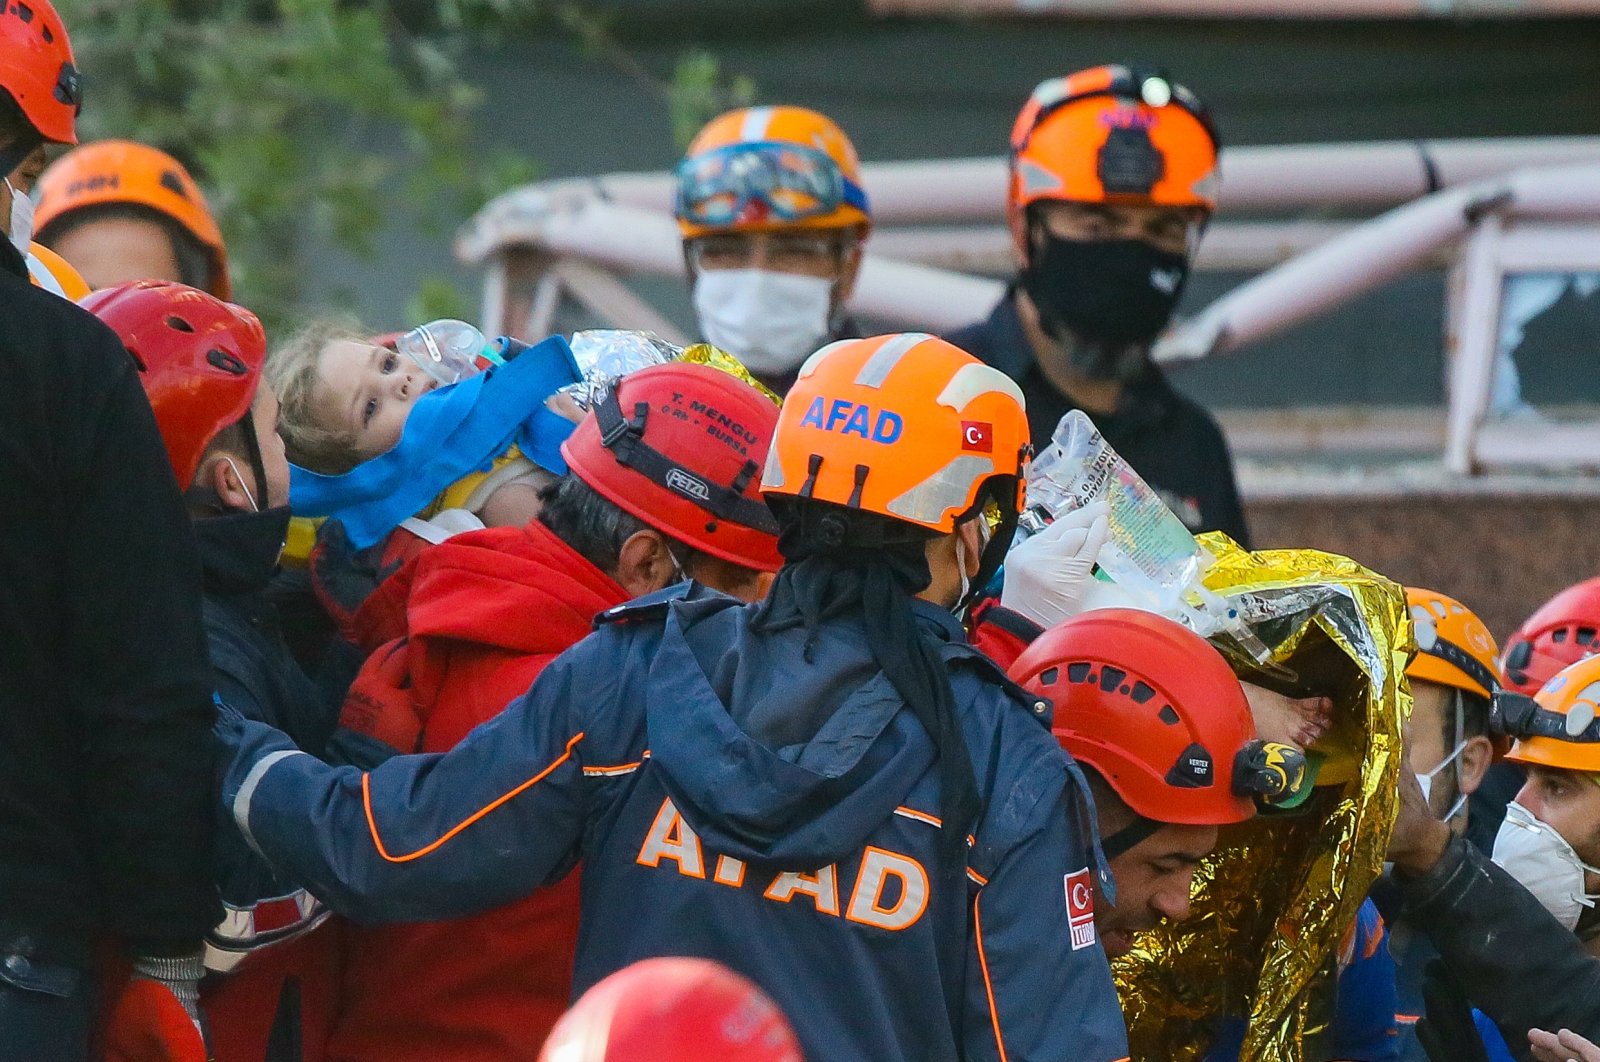 Rescue teams carry 4-year-old Ayda Gezgin after she was rescued from the rubble in the Bayraklı district 91 hours after an earthquake, in Izmir, western Turkey, Nov. 3, 2020. (AA Photo)